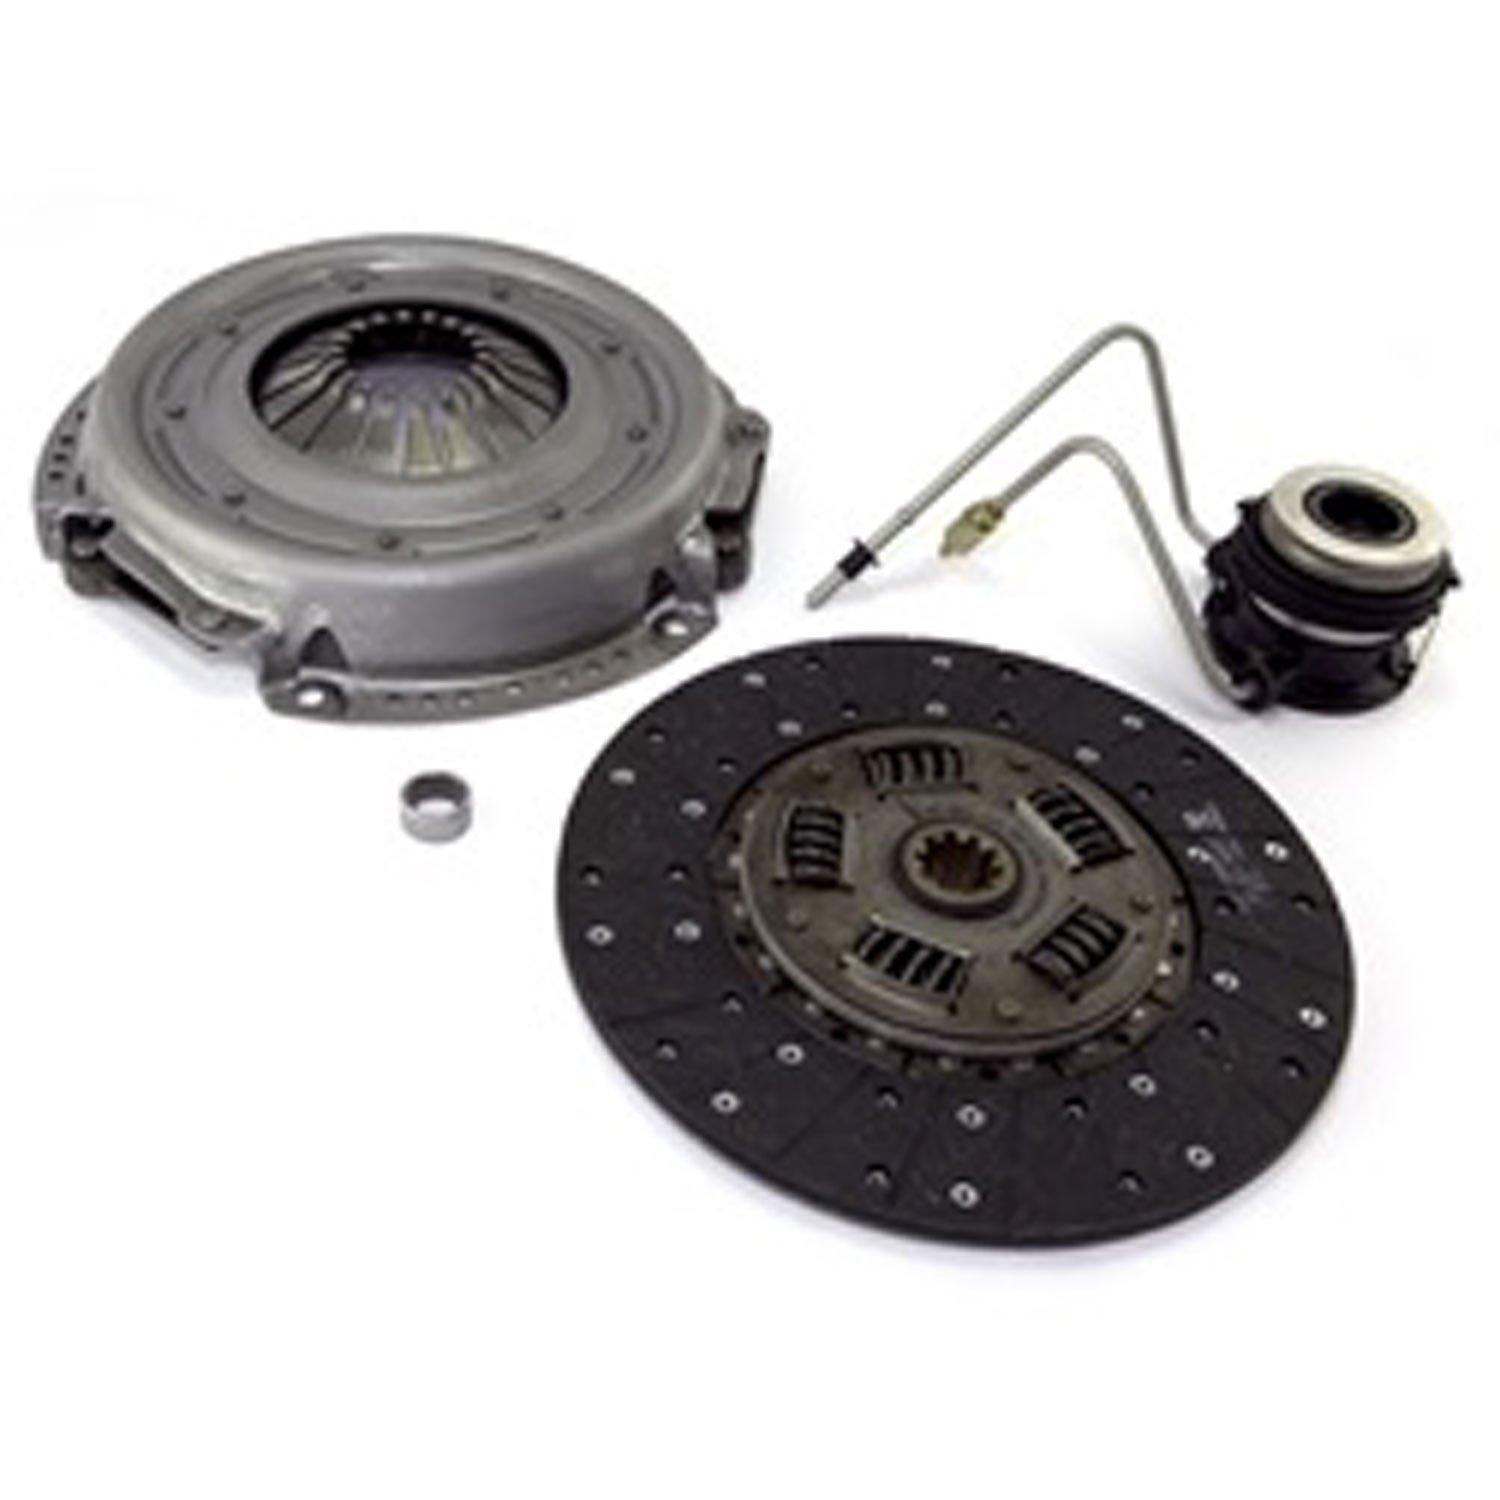 Master Clutch Kit 93 Jeep Cherokee/Wrangler 4.0. Master kit includes the pressure plate disc throw-o